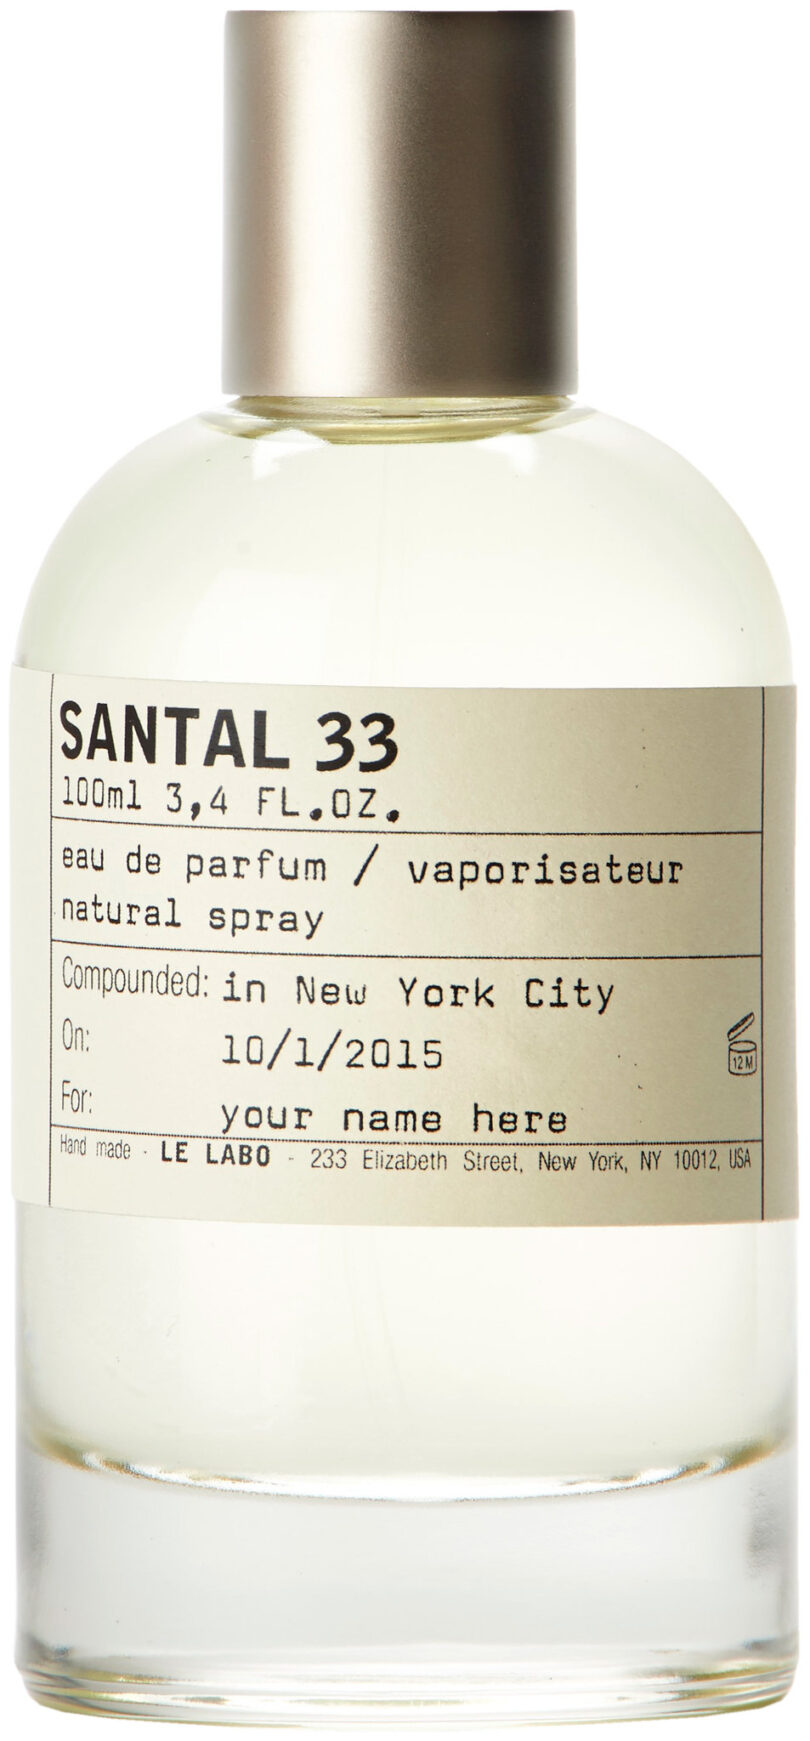 What Scents are in Santal 33